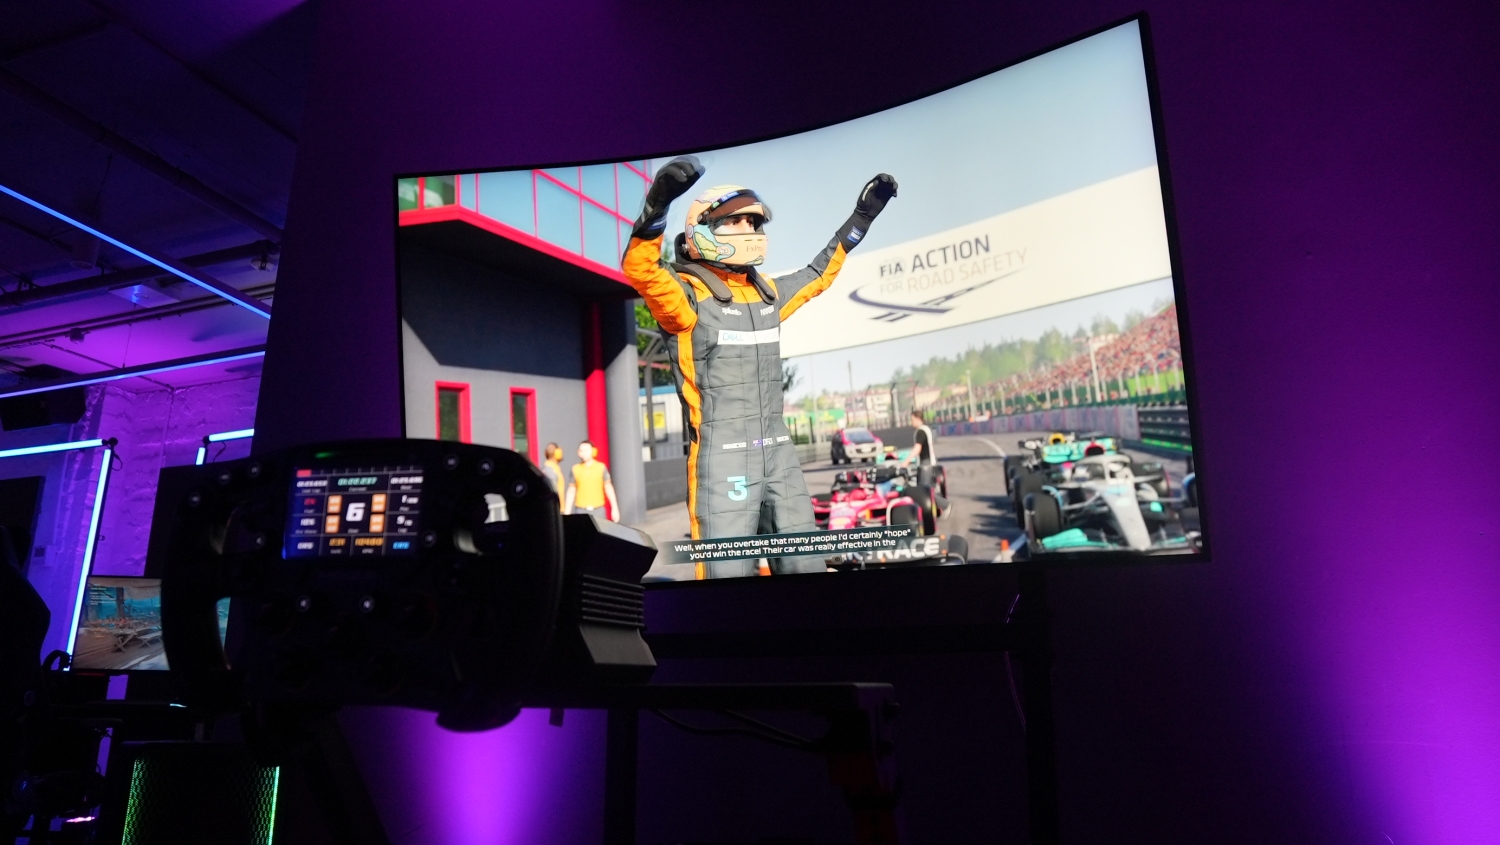 Samsung Odyssey Ark (2023) hands-on review: I get it now